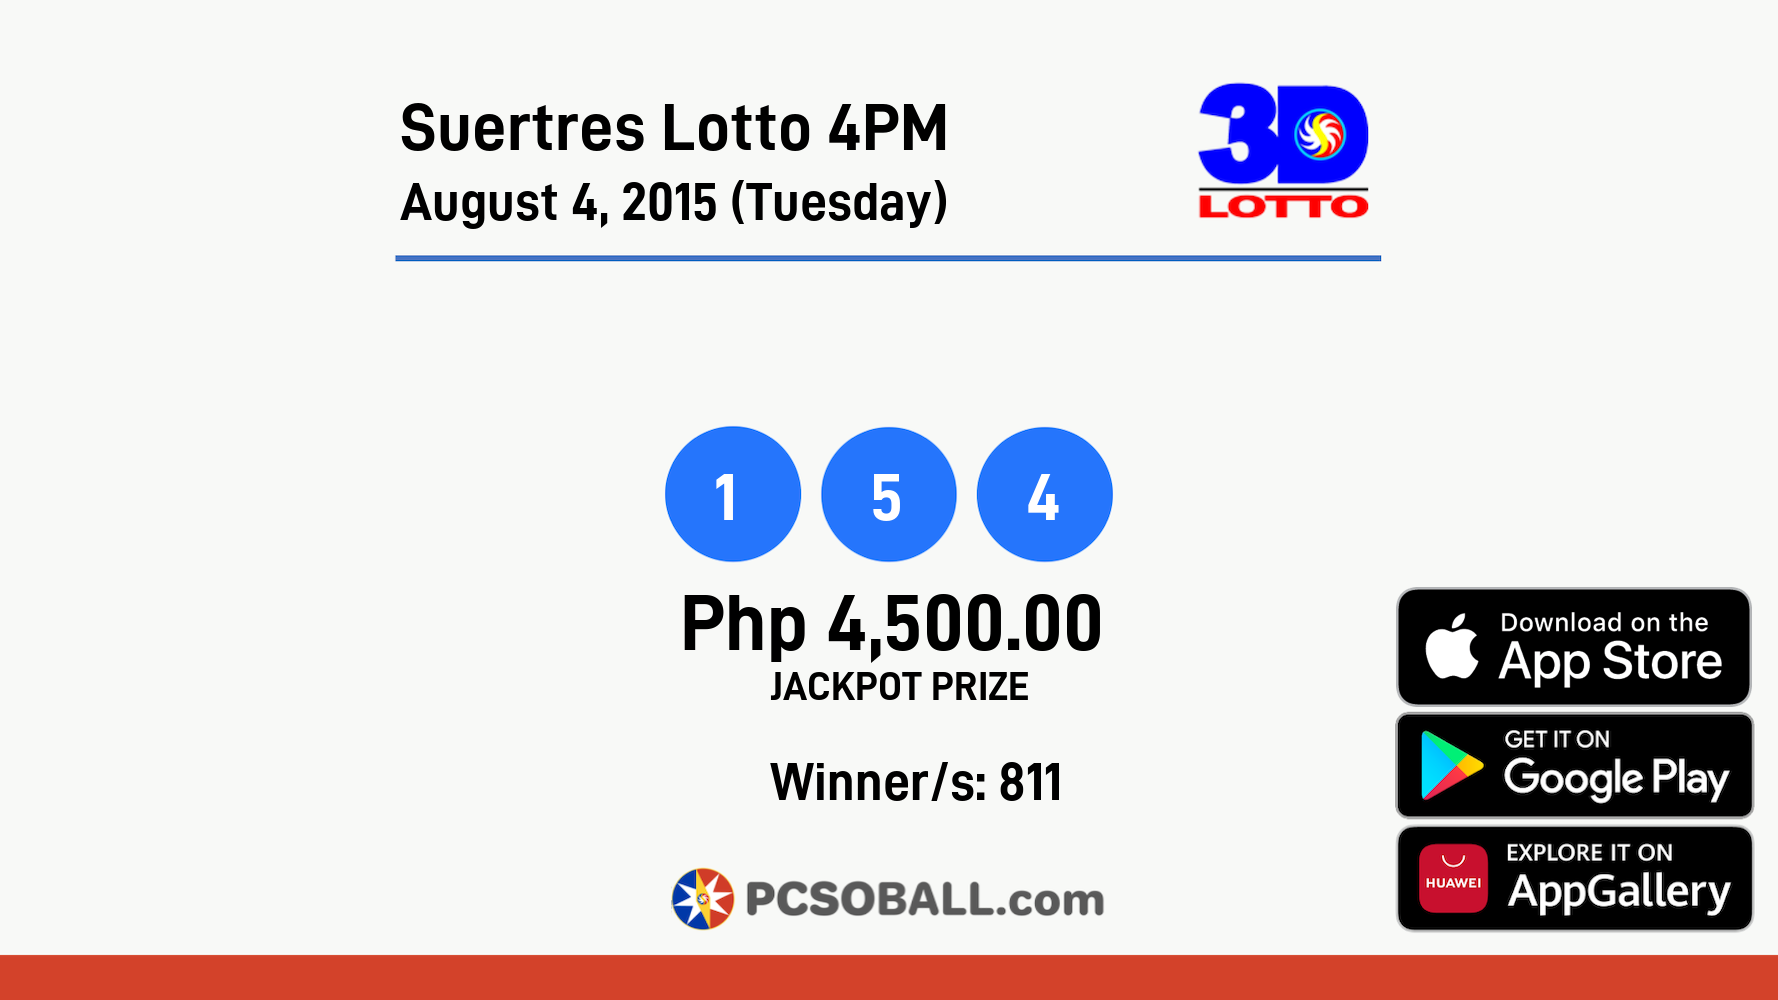 Suertres Lotto 4PM August 4, 2015 (Tuesday) Result